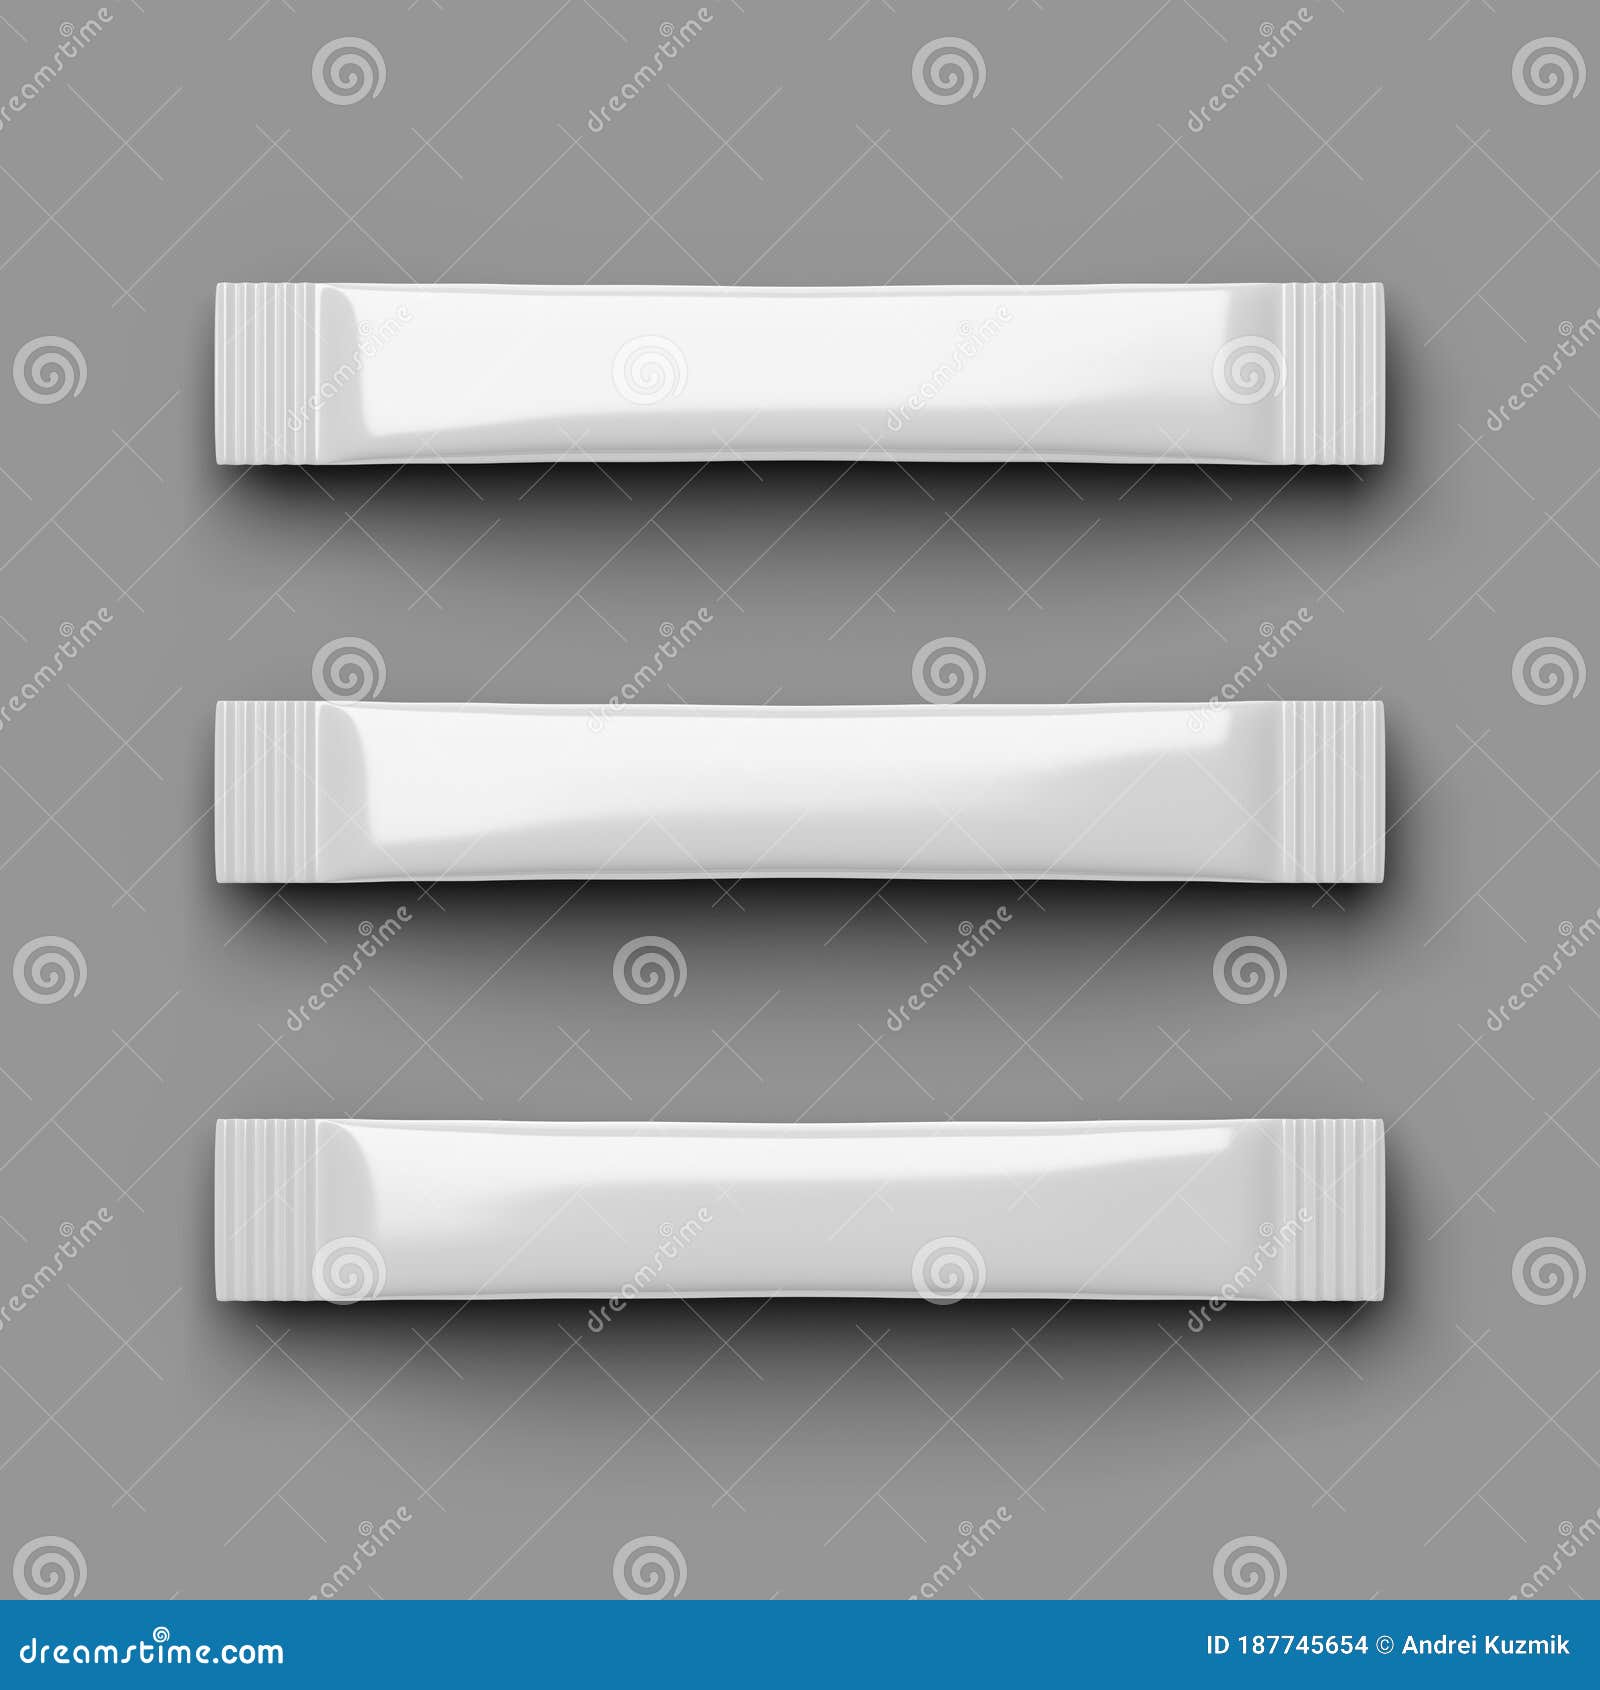 Download Blank White Sugar Stick Sachet Pack On Gray Background ...